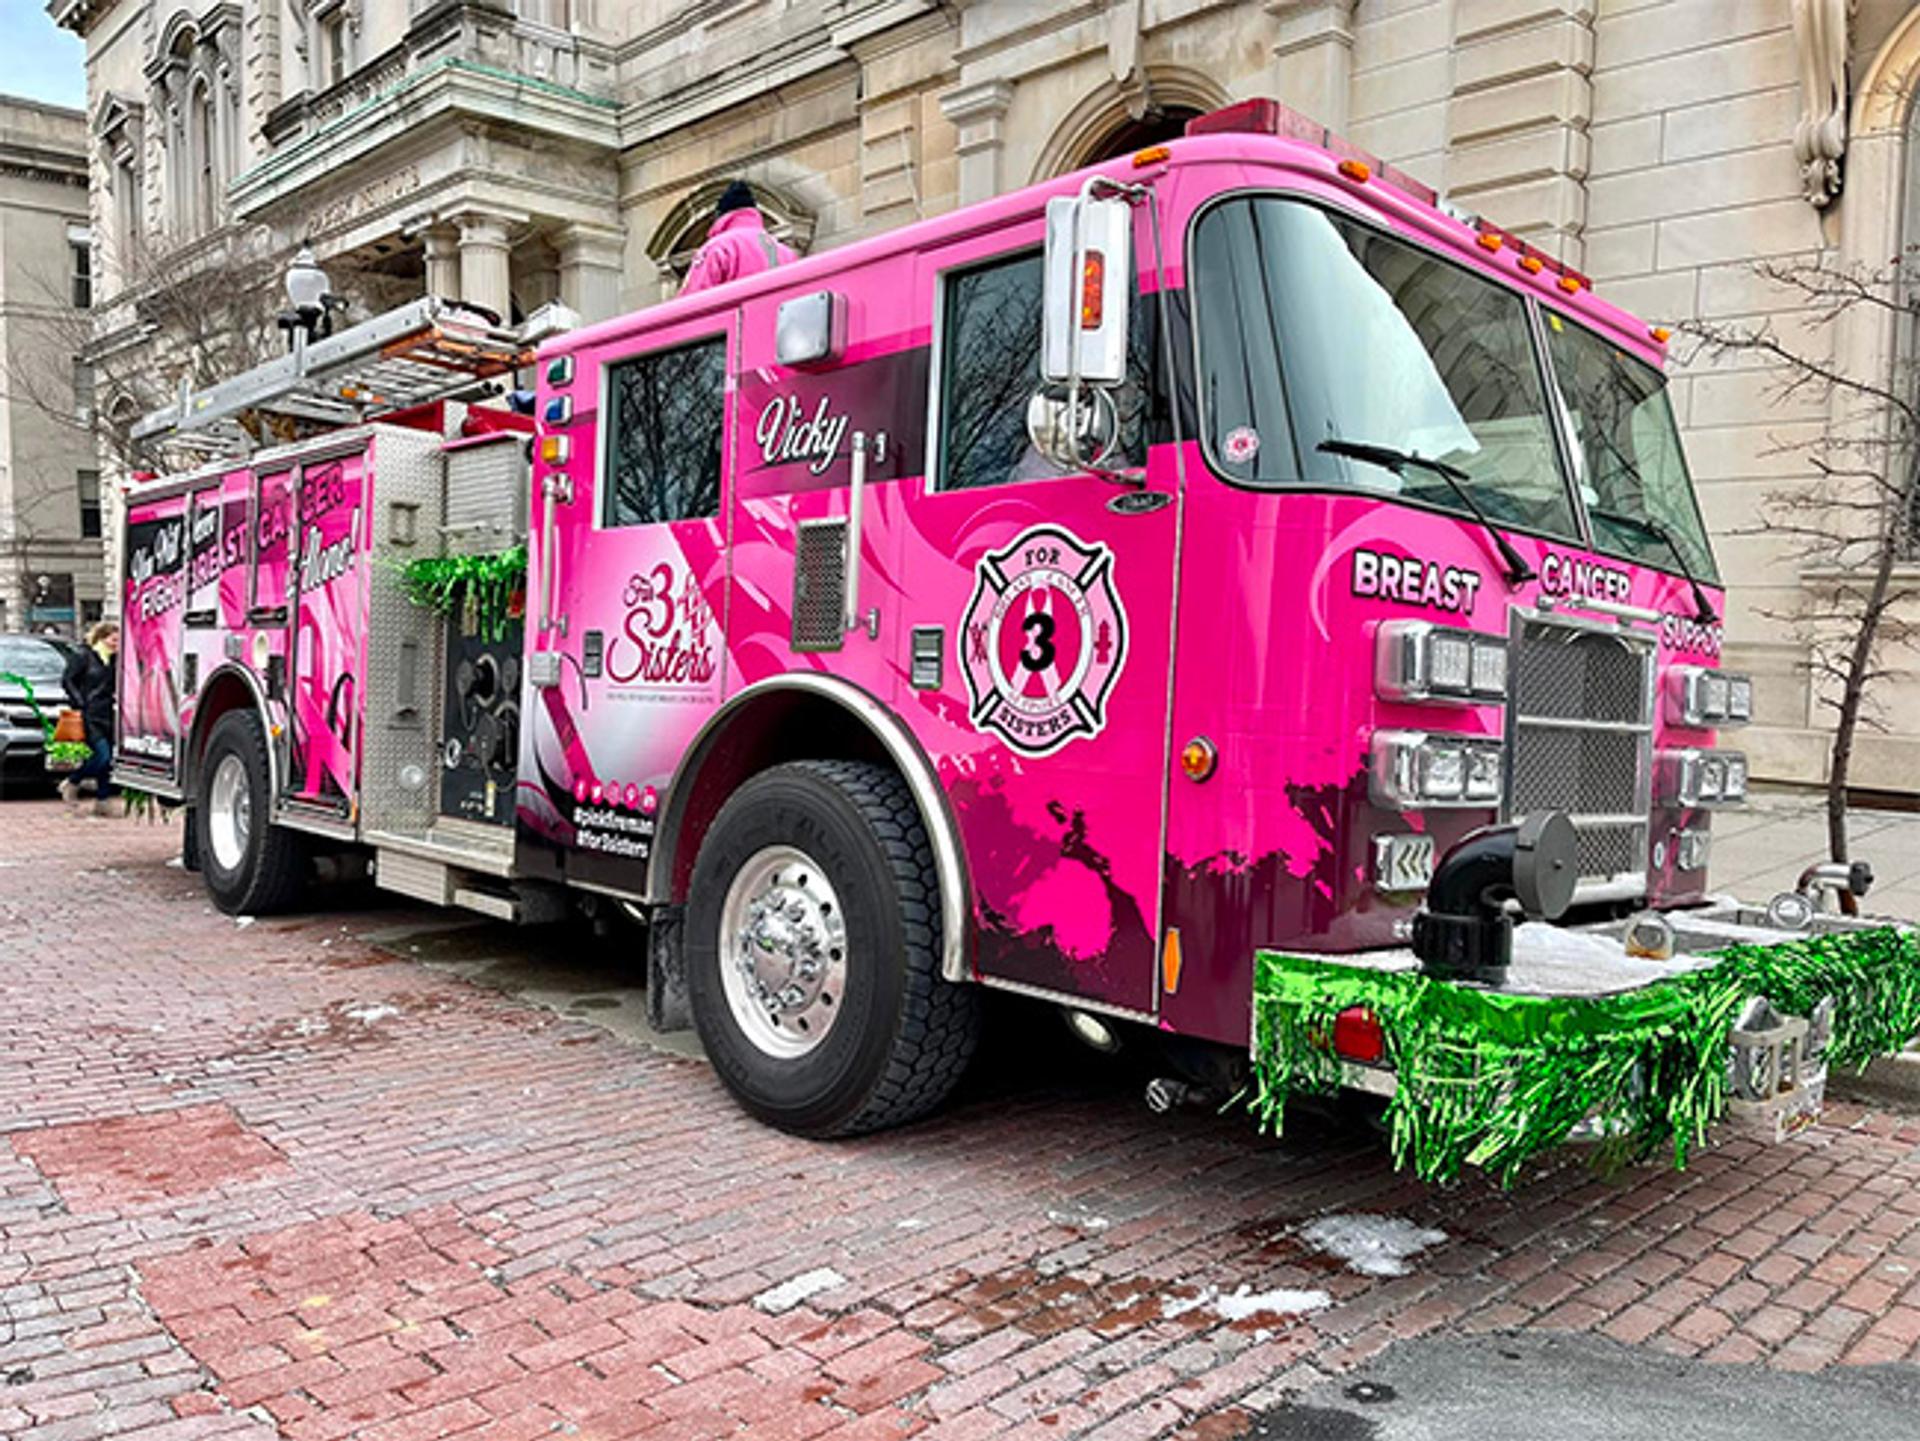 A pink-painted fire truck owned by For 3 Sisters